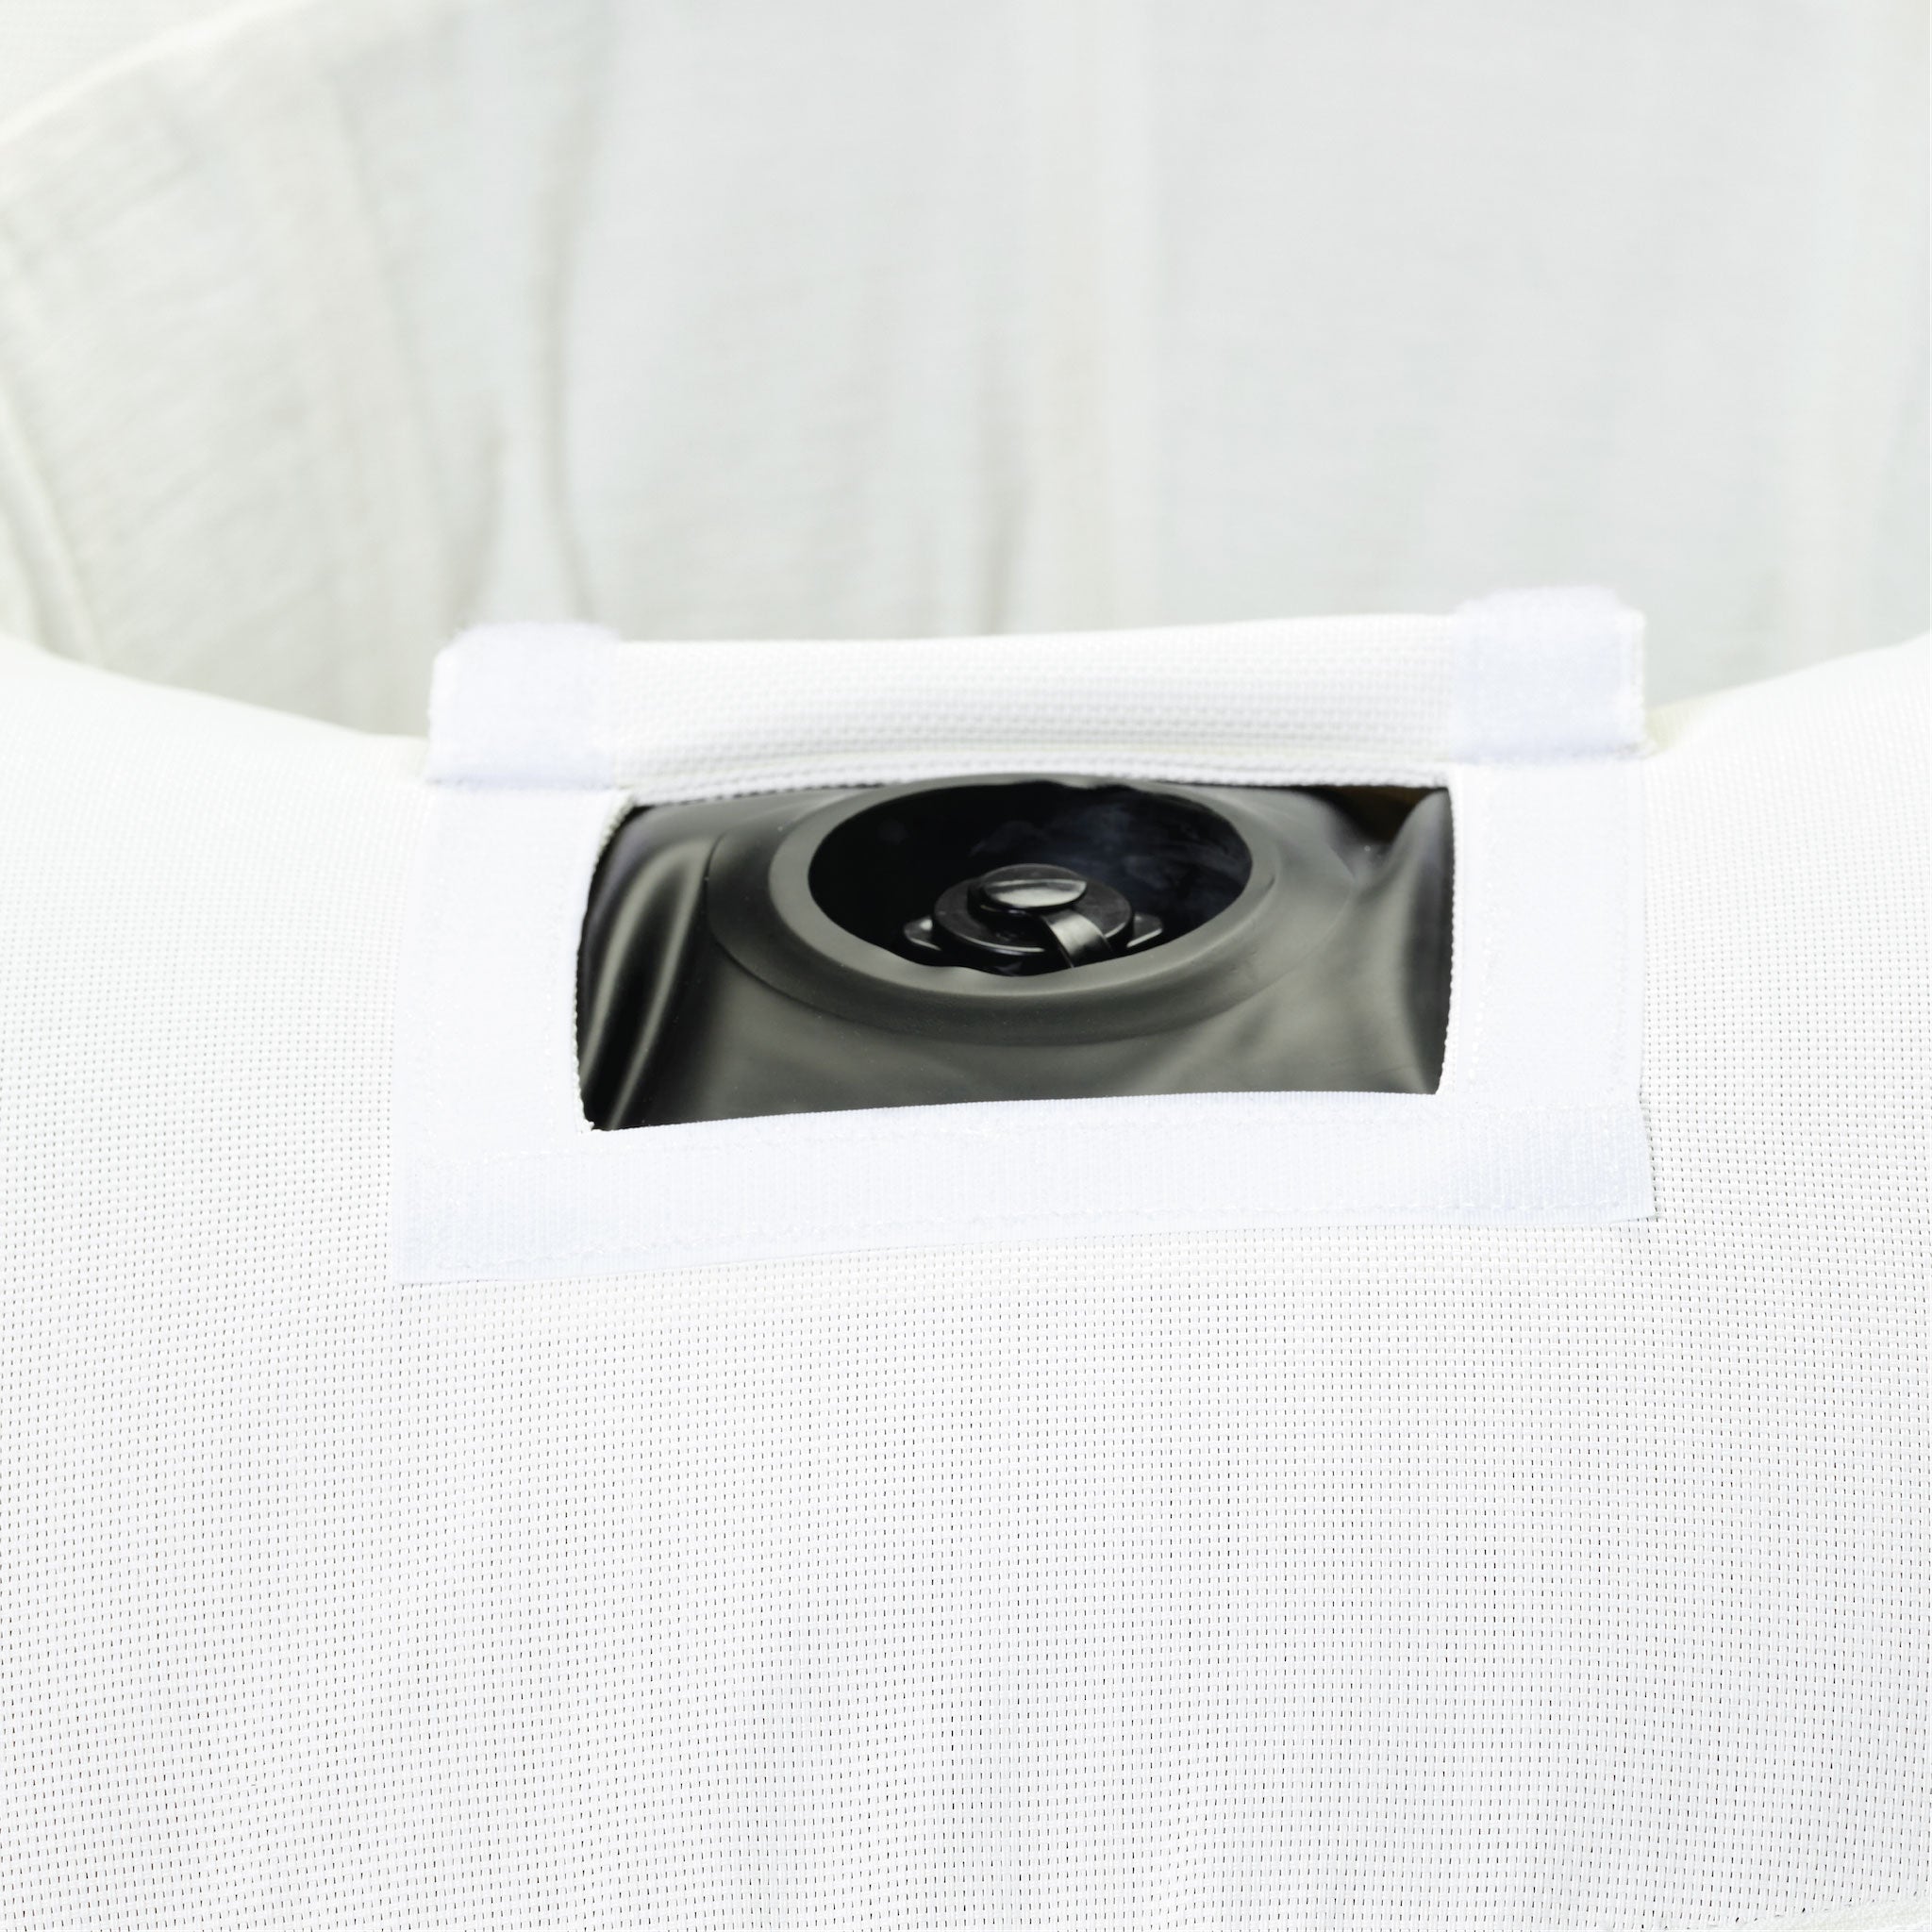 A ring luxury lilo in a white terry toweled fabric upside down displaying the base and velcro window to access the boston valve.